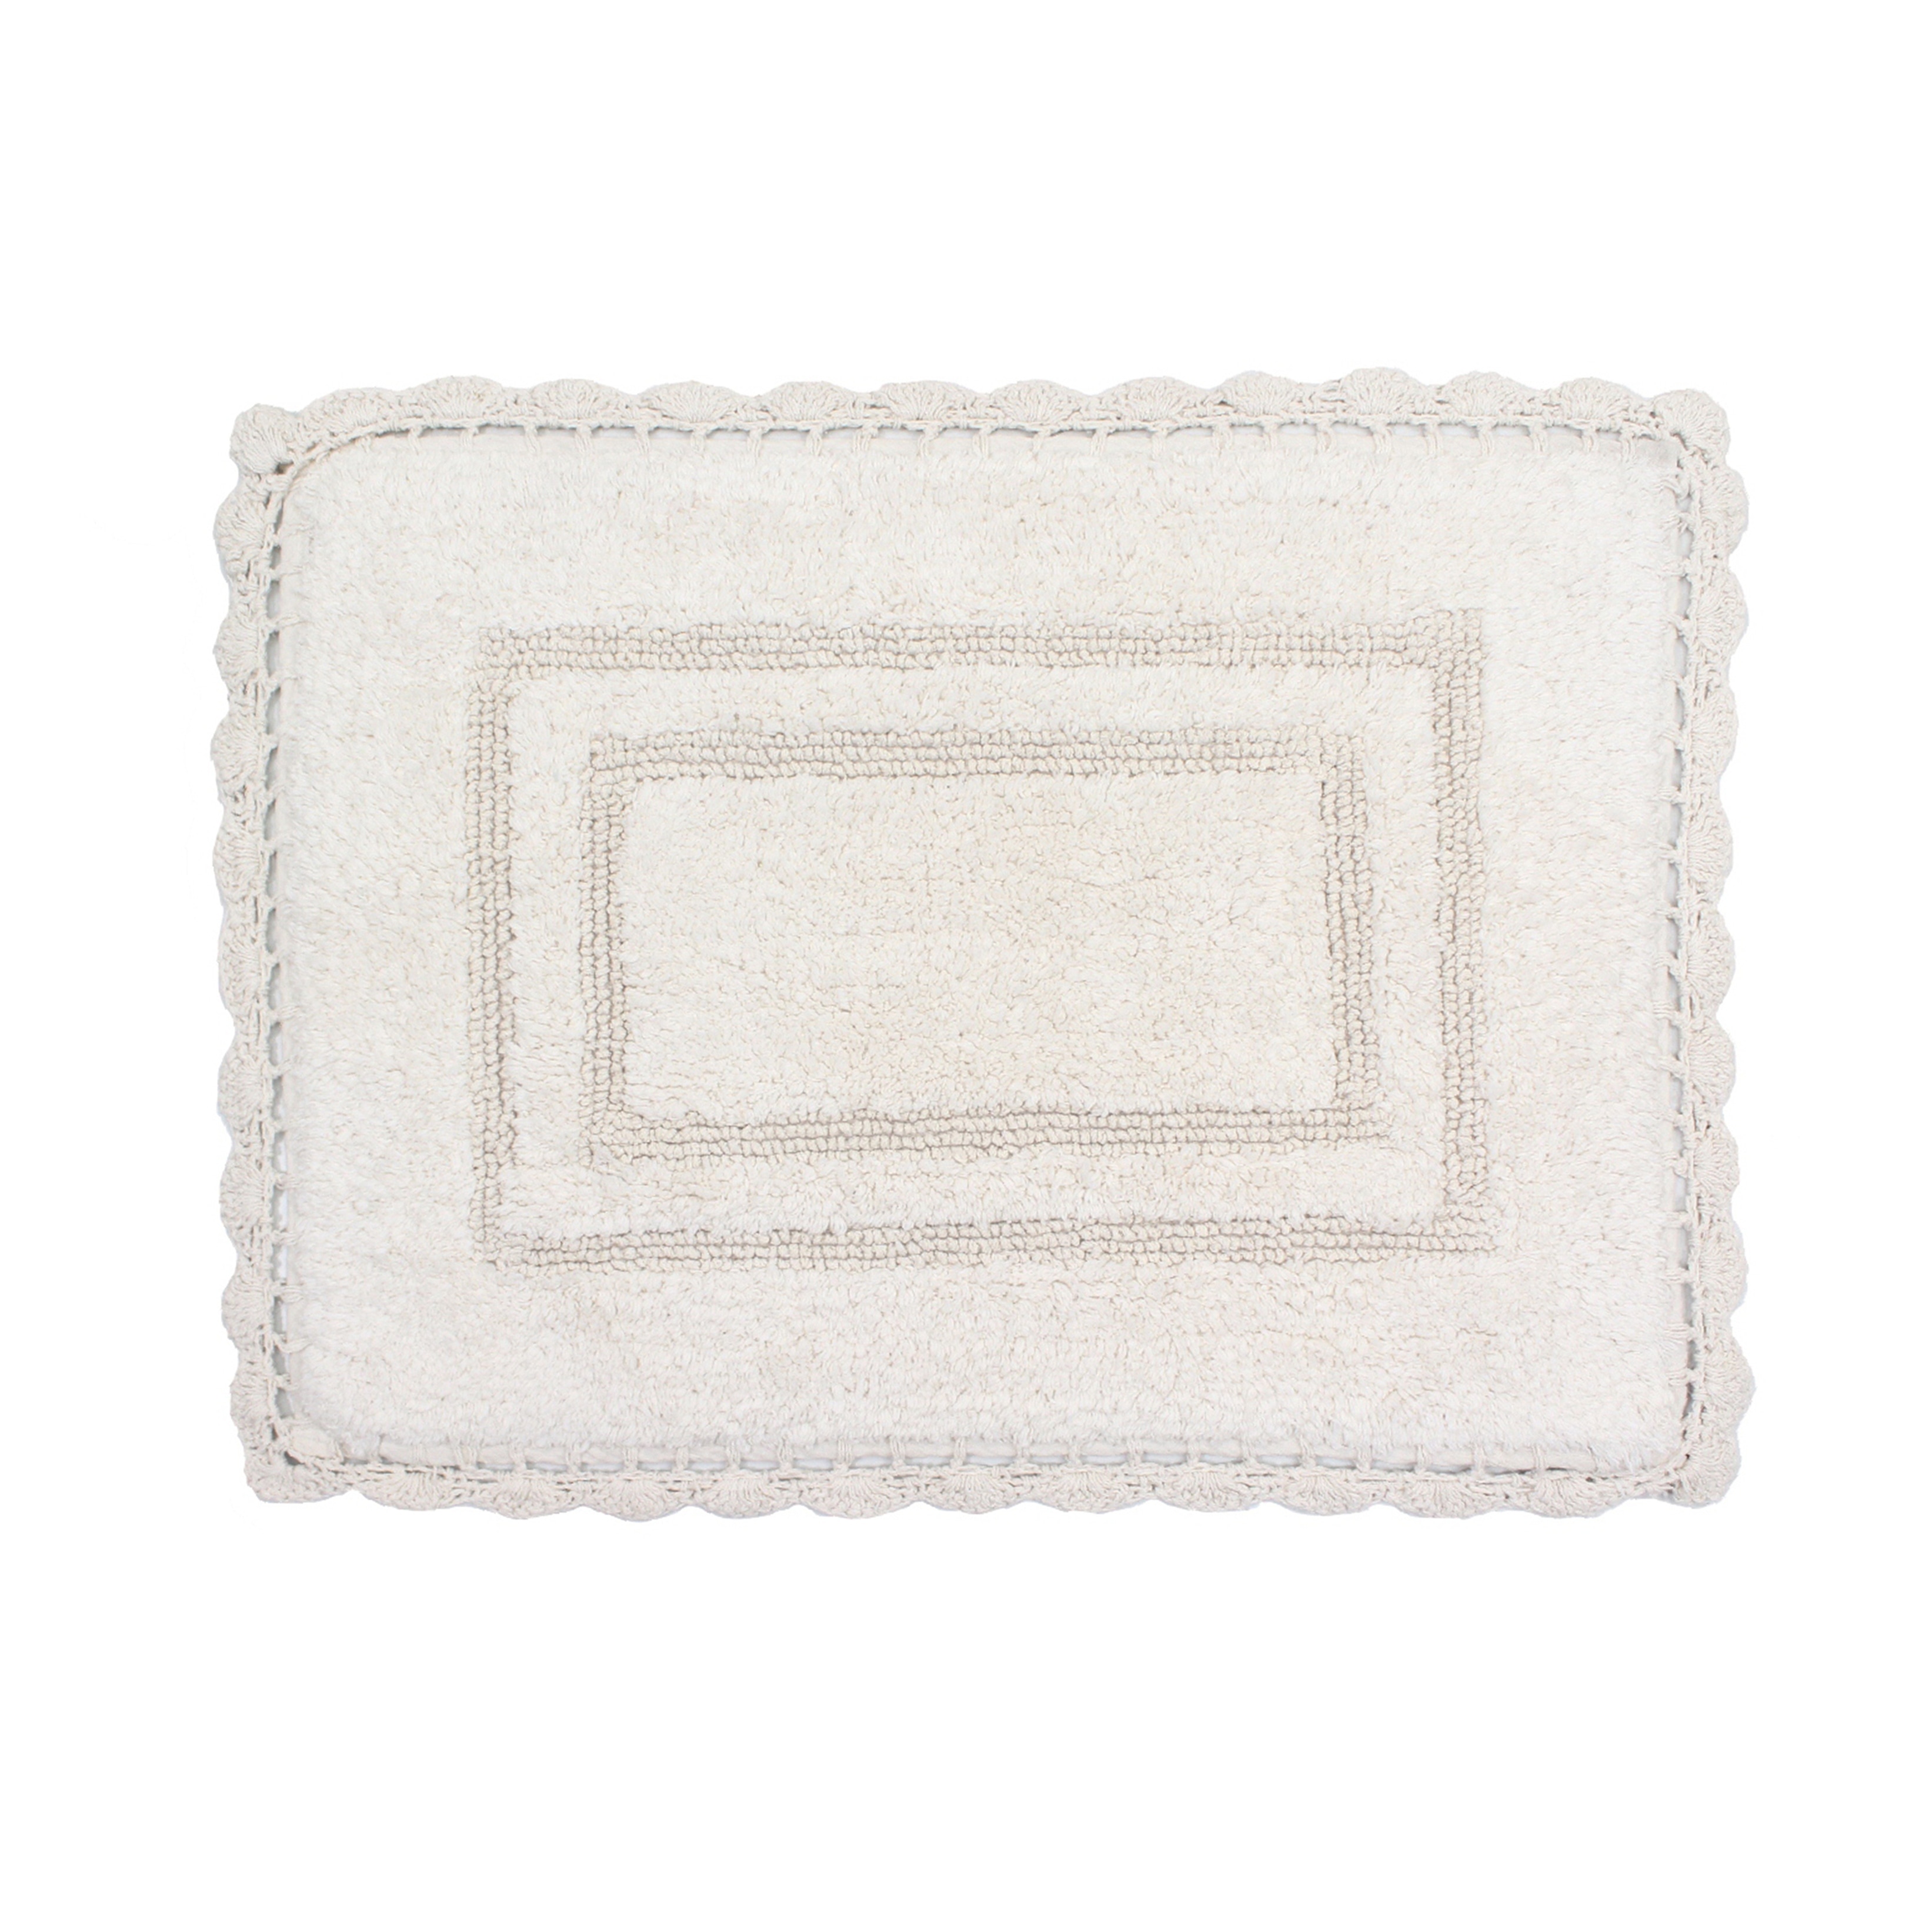 https://ak1.ostkcdn.com/images/products/is/images/direct/cfadc1bf37f1b0a3f9b7c0de9c23536695c97e74/Casual-Elegence-Bathmat-Collection---Absorbent-Cotton-Soft-Reversible-Bath-Rug%2C-Machine-Washable.jpg